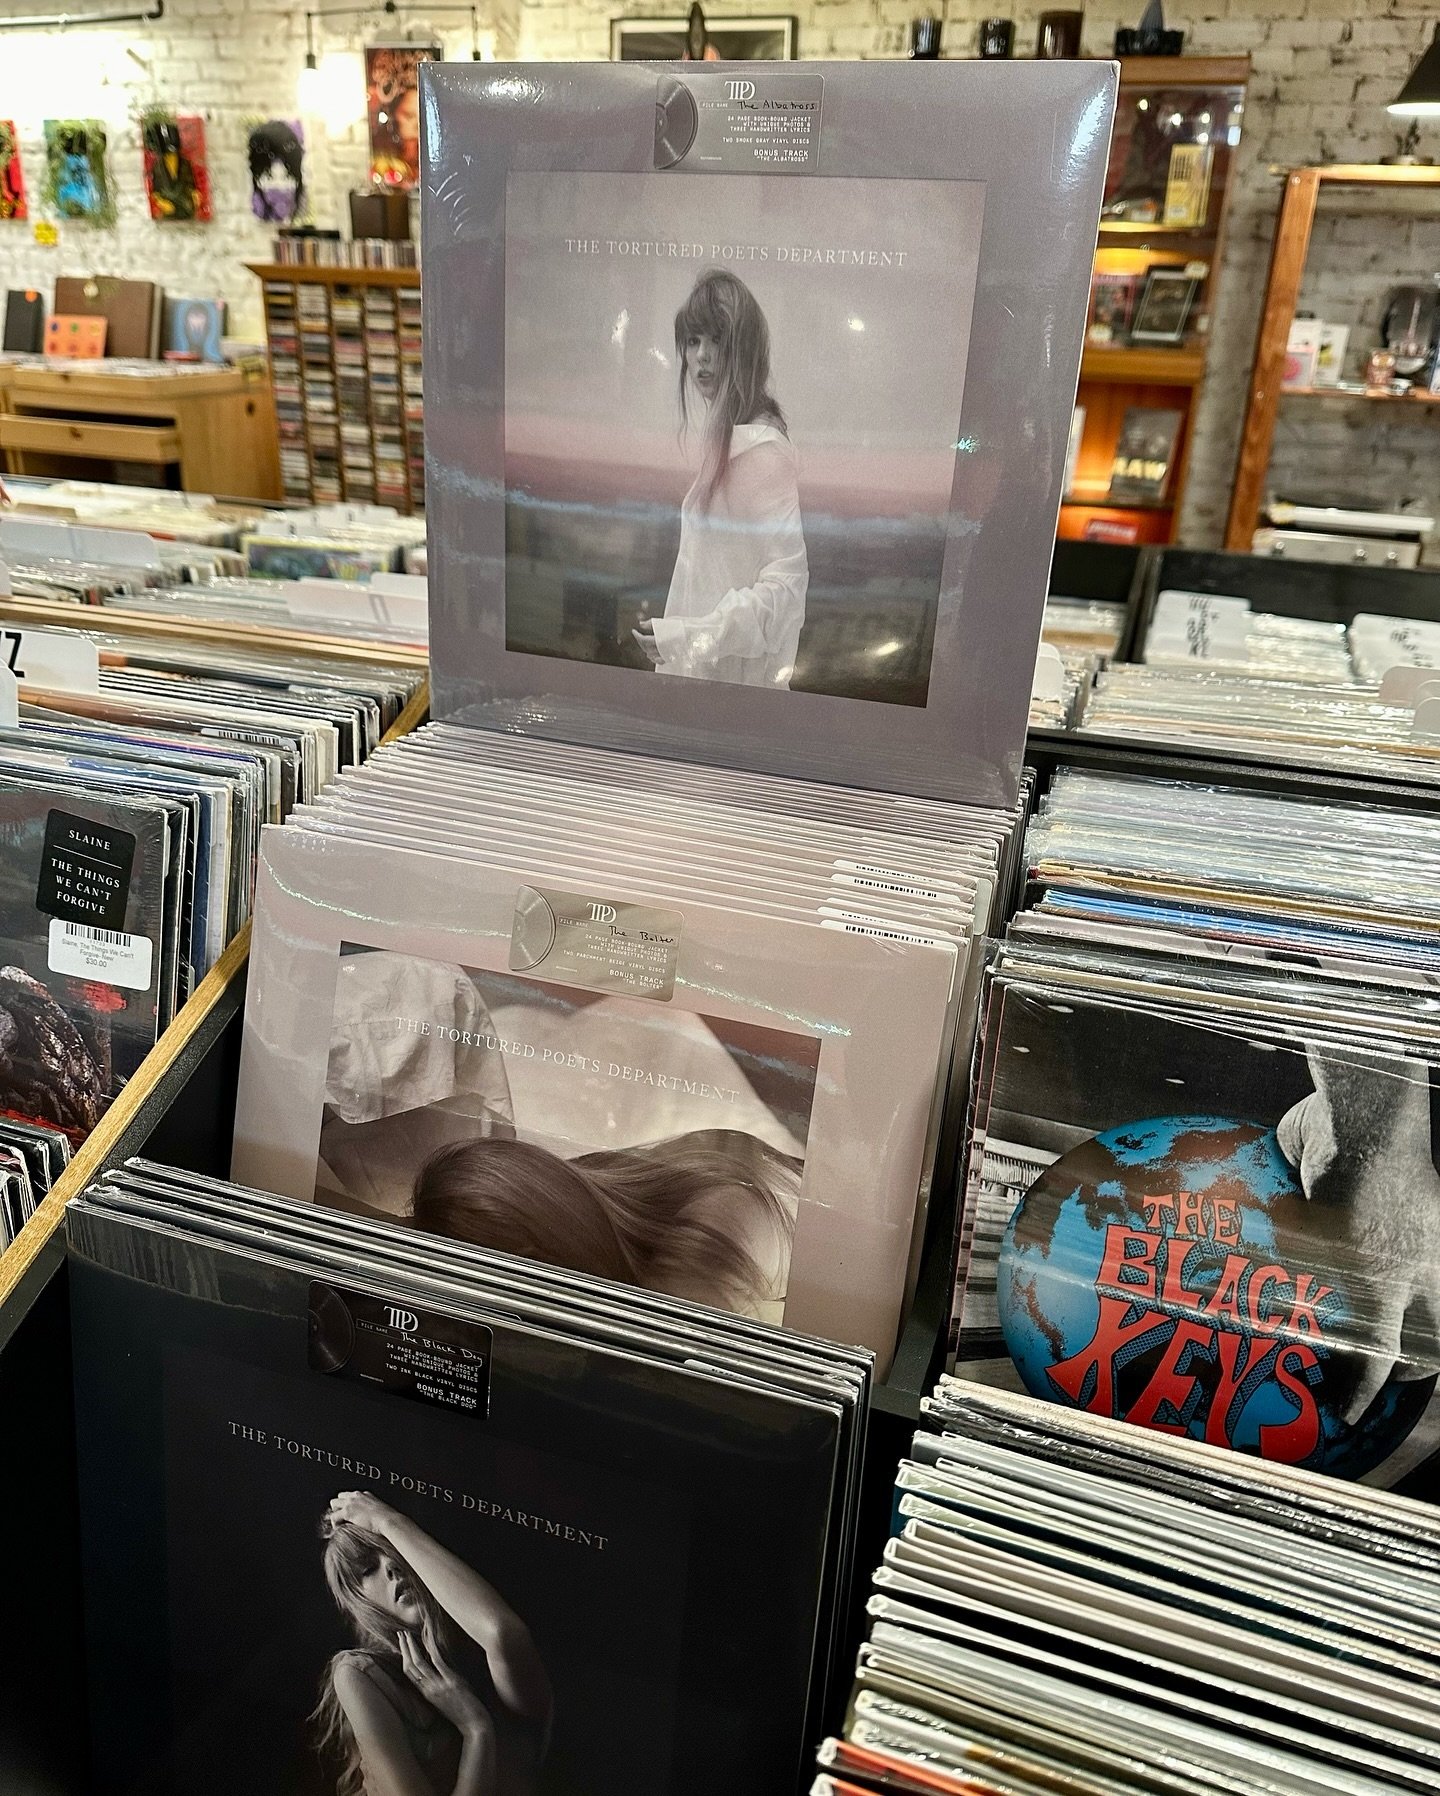 🗣️ We have Taylor&rsquo;s new album back in stock! Y&rsquo;all cleared us out on Record Store Day, but she&rsquo;s back with a vengeance today 💪💪💪 We&rsquo;re here until 6!